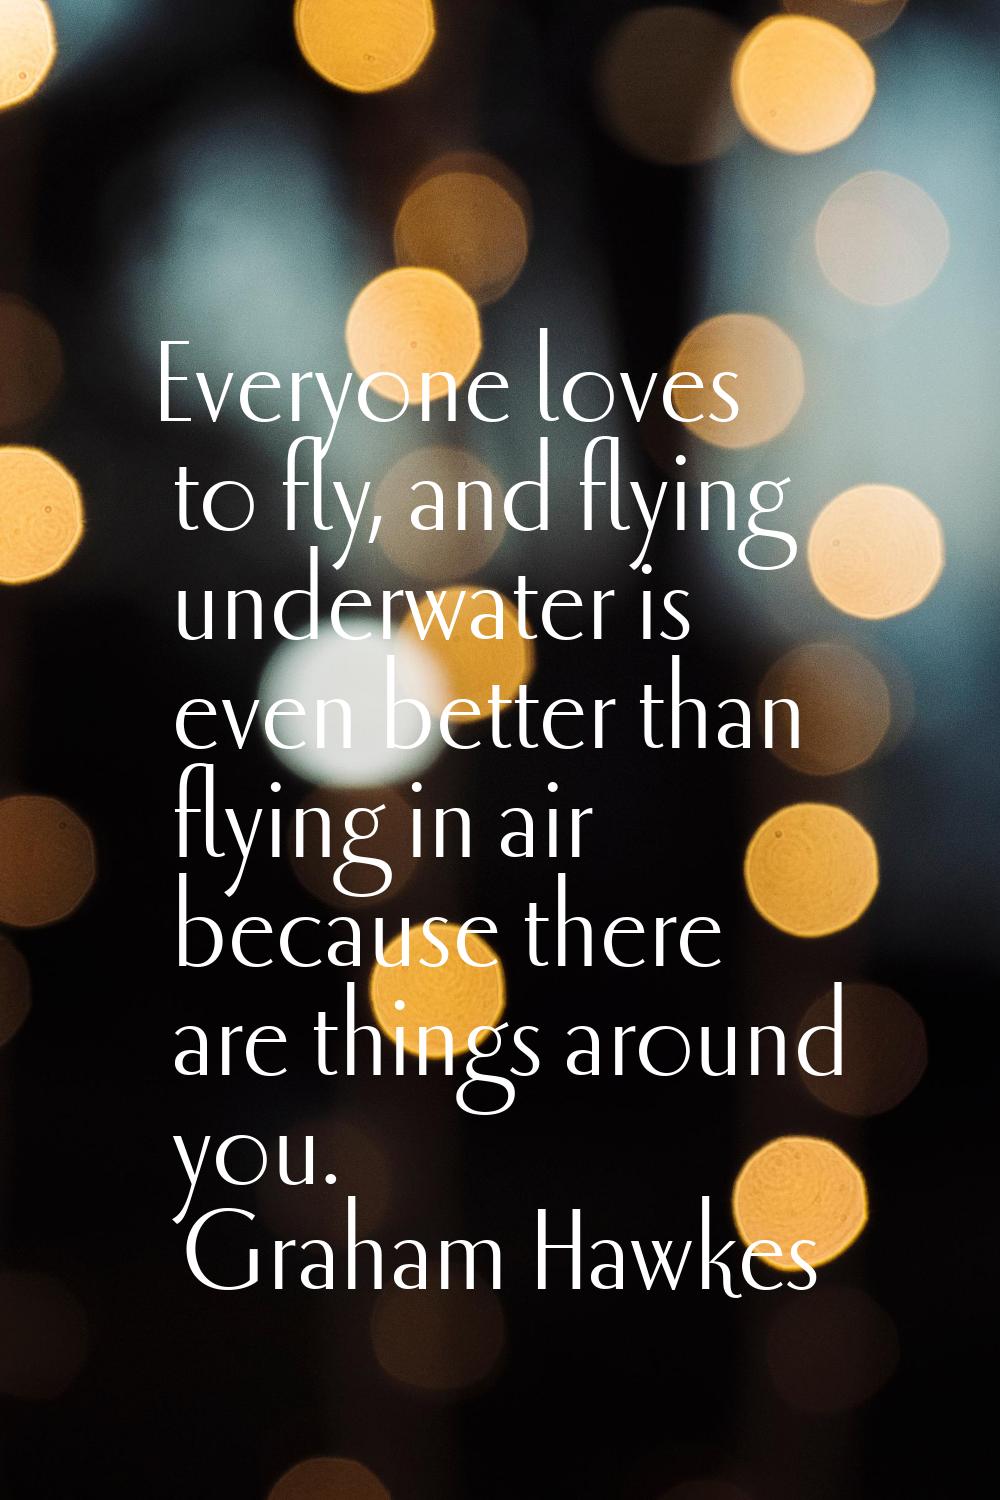 Everyone loves to fly, and flying underwater is even better than flying in air because there are th